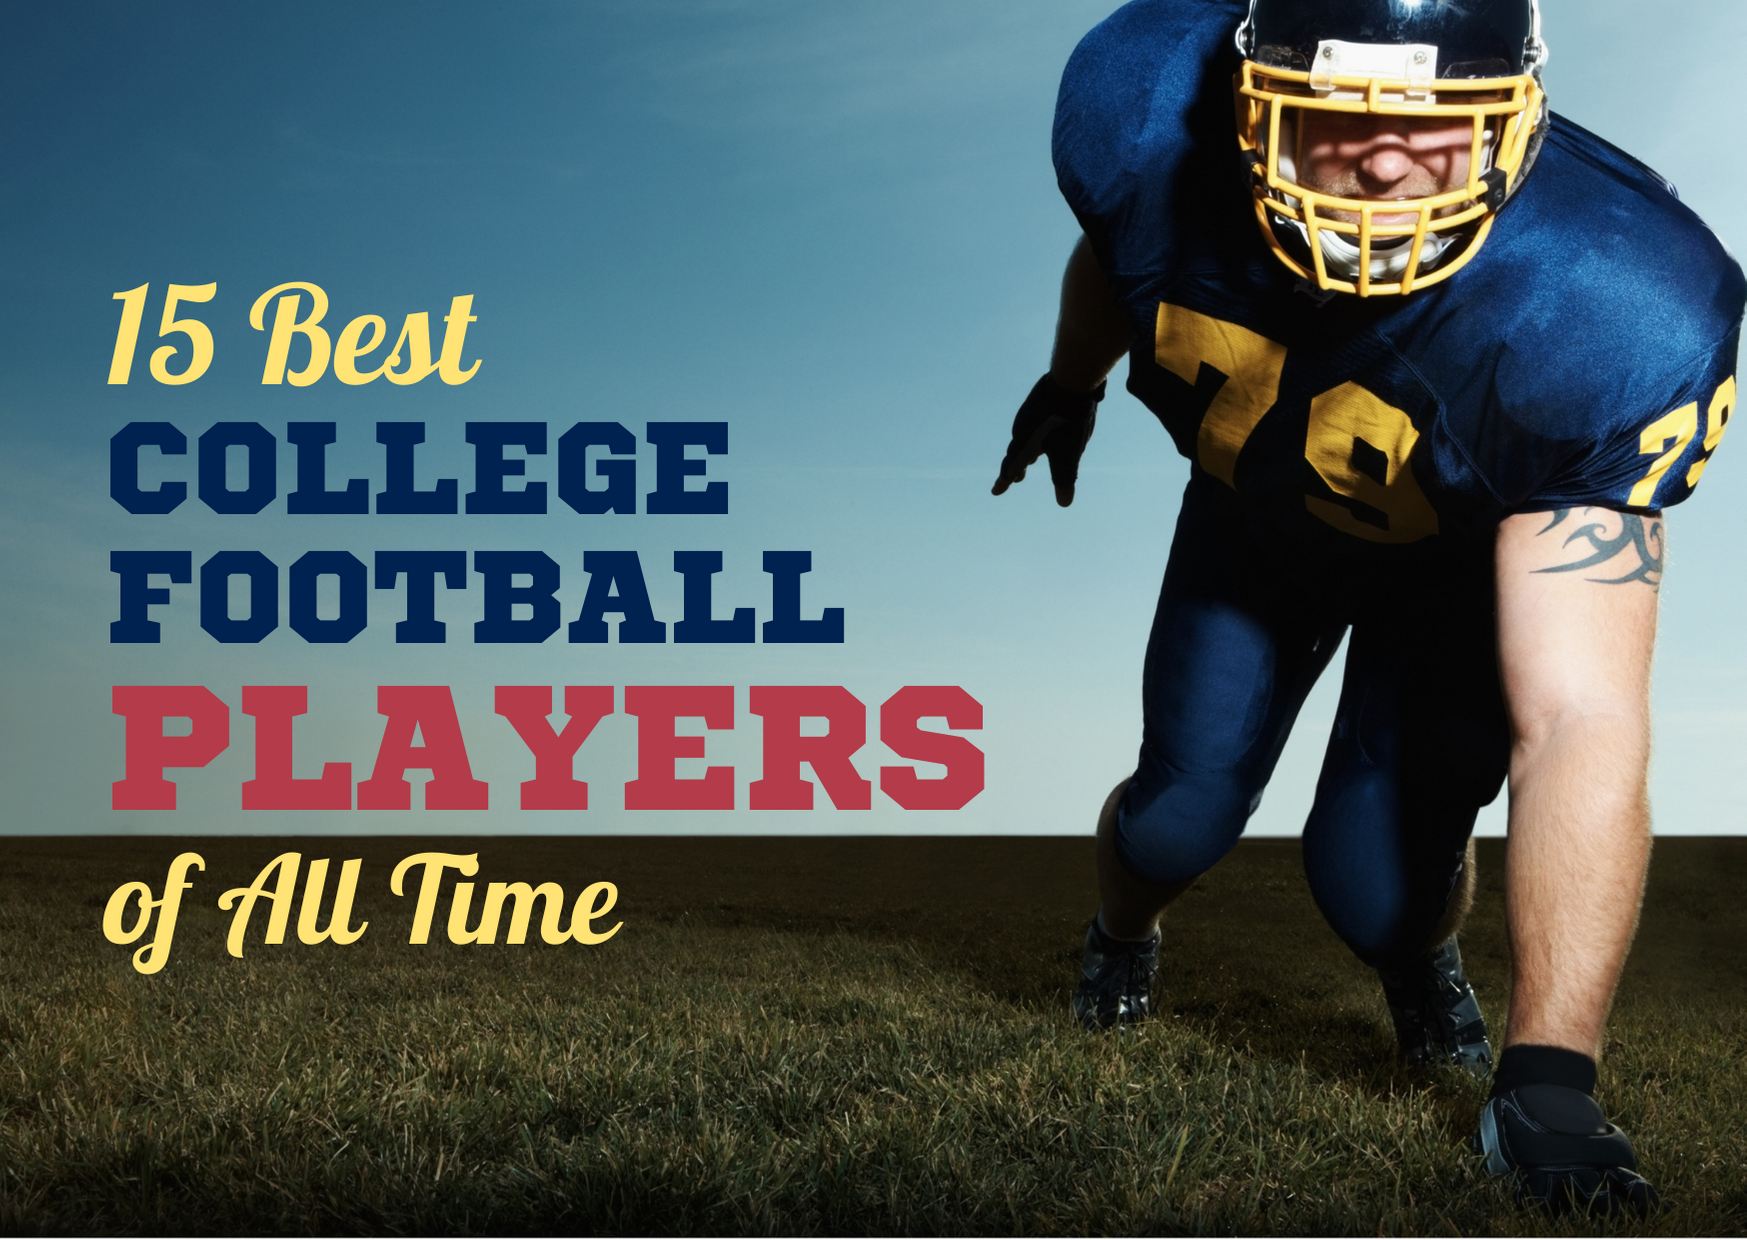 Updating and ranking the 30 greatest college football players of all time